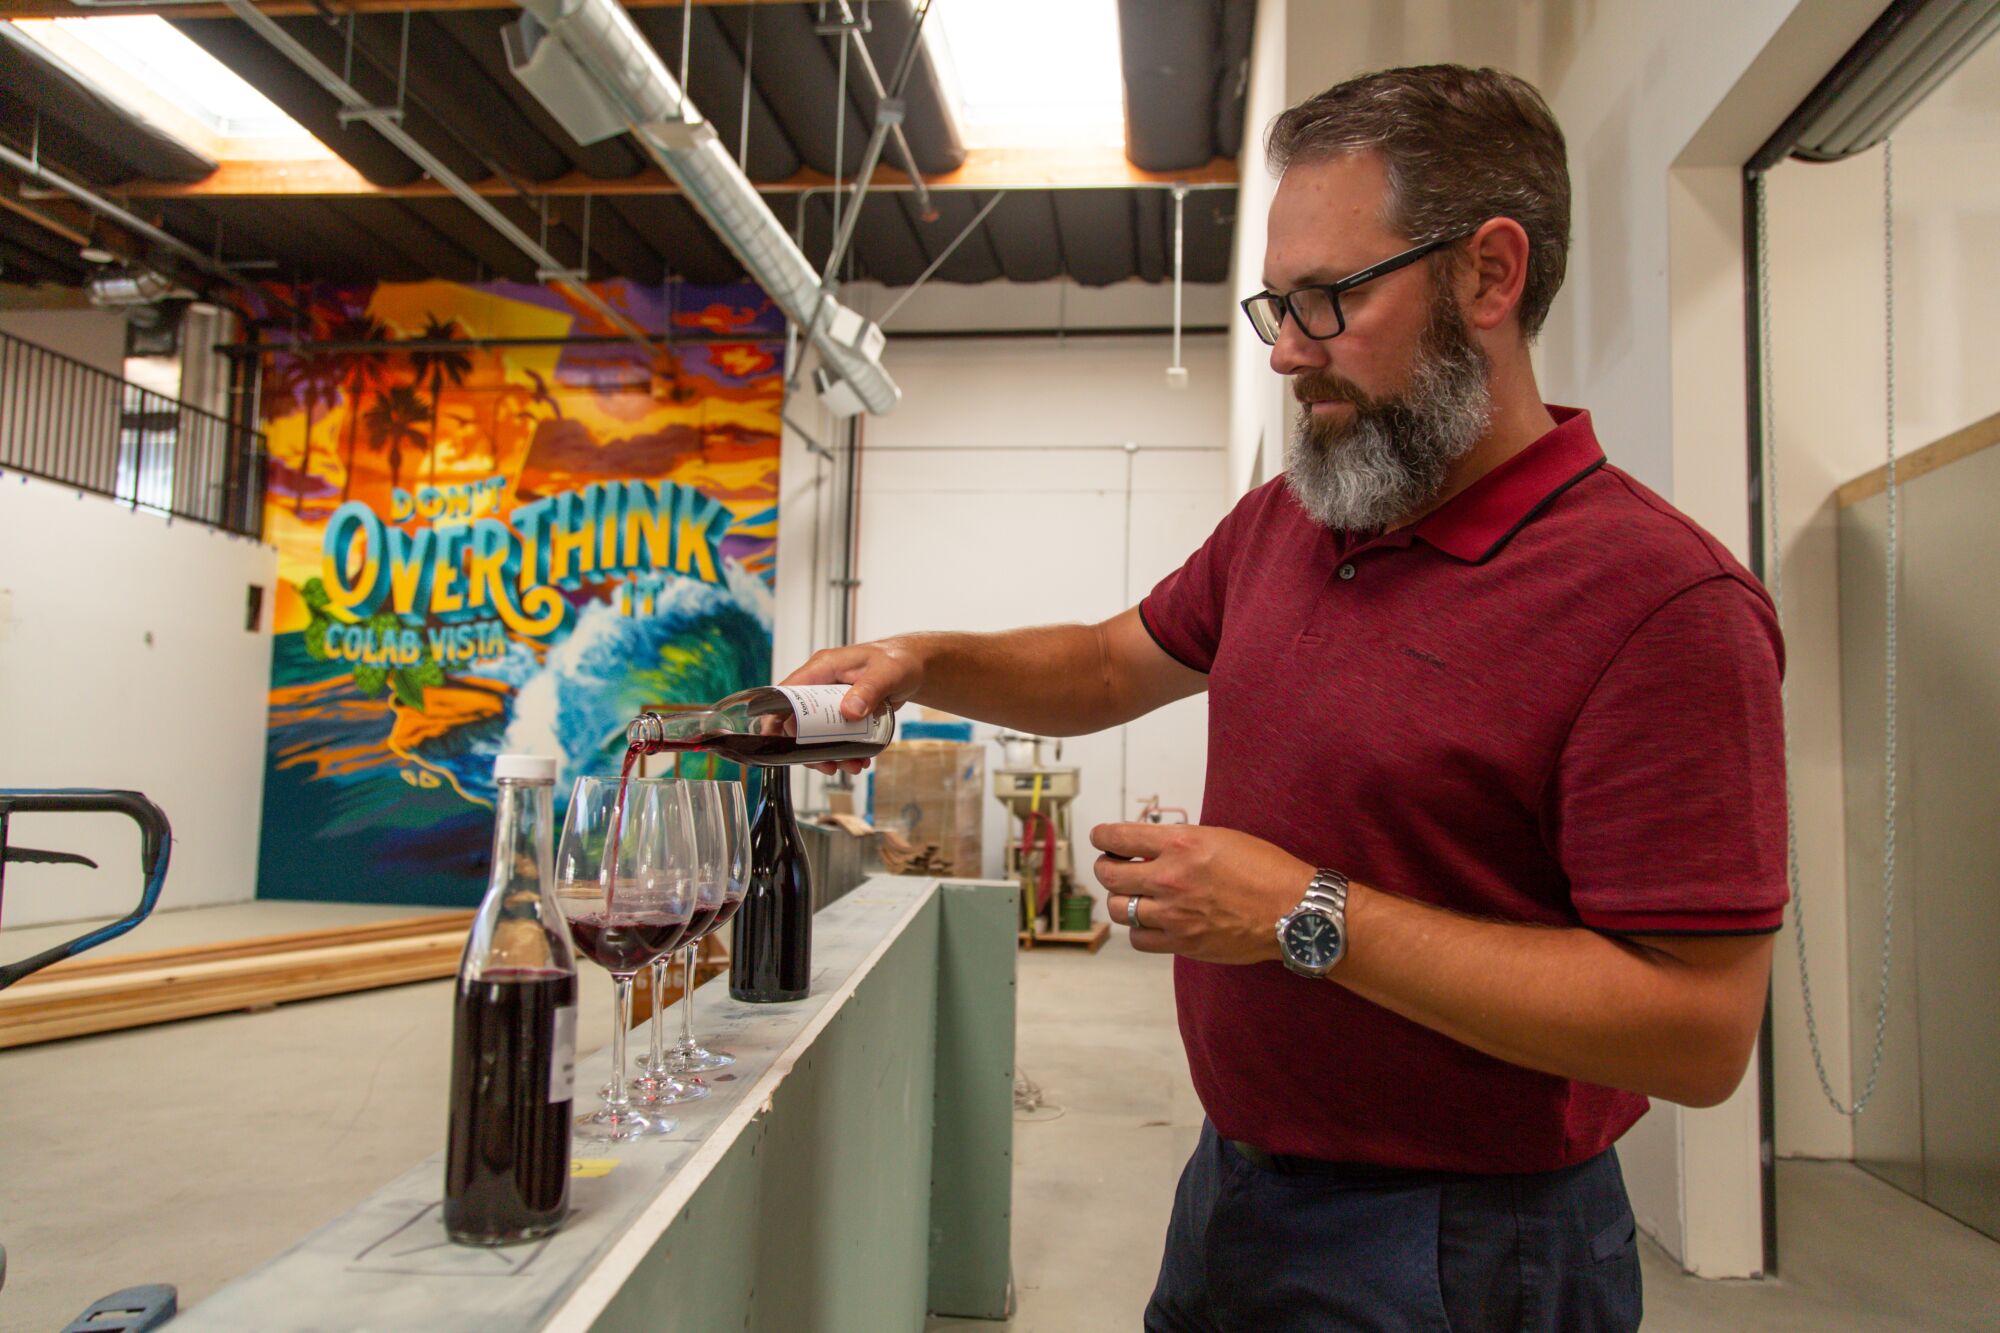 Joseph Deutsch pours samples from the winery that he will be operating inside Co-Lab Vista.